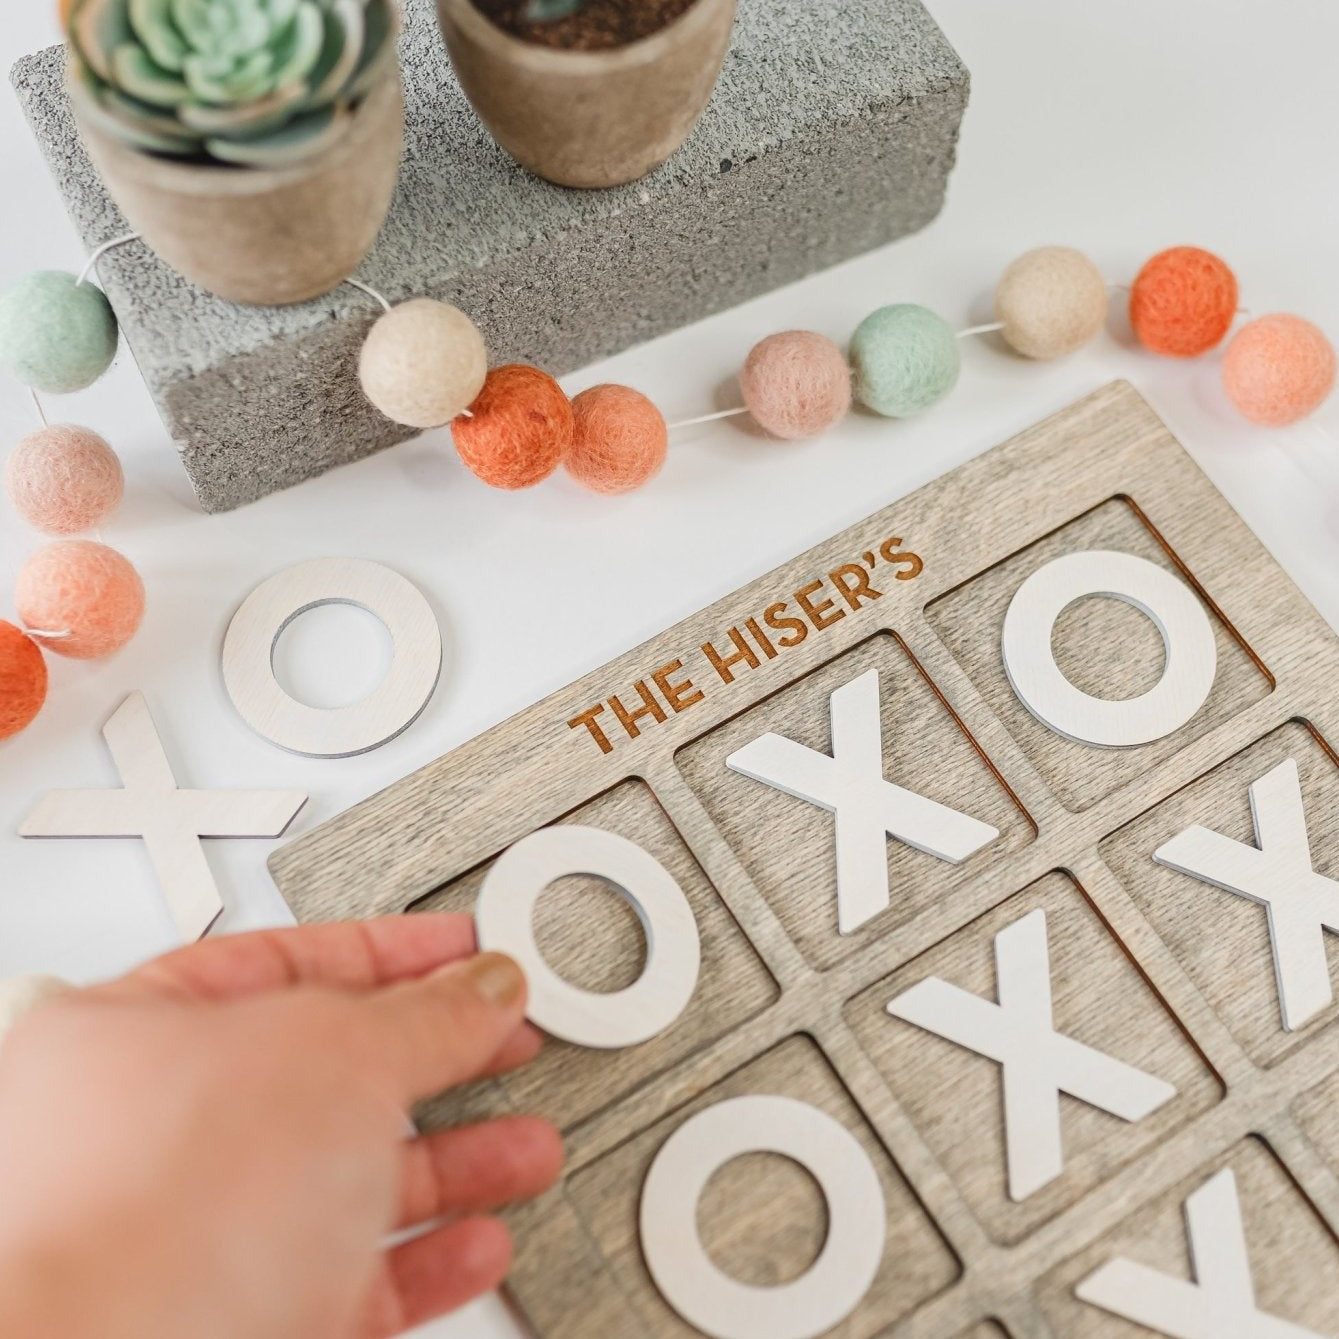 Custom Tic Tac Toe Board Game - Gray Stained Birch Plywood with White XO Game Pieces - by LeeMo Designs in Bend, Oregon